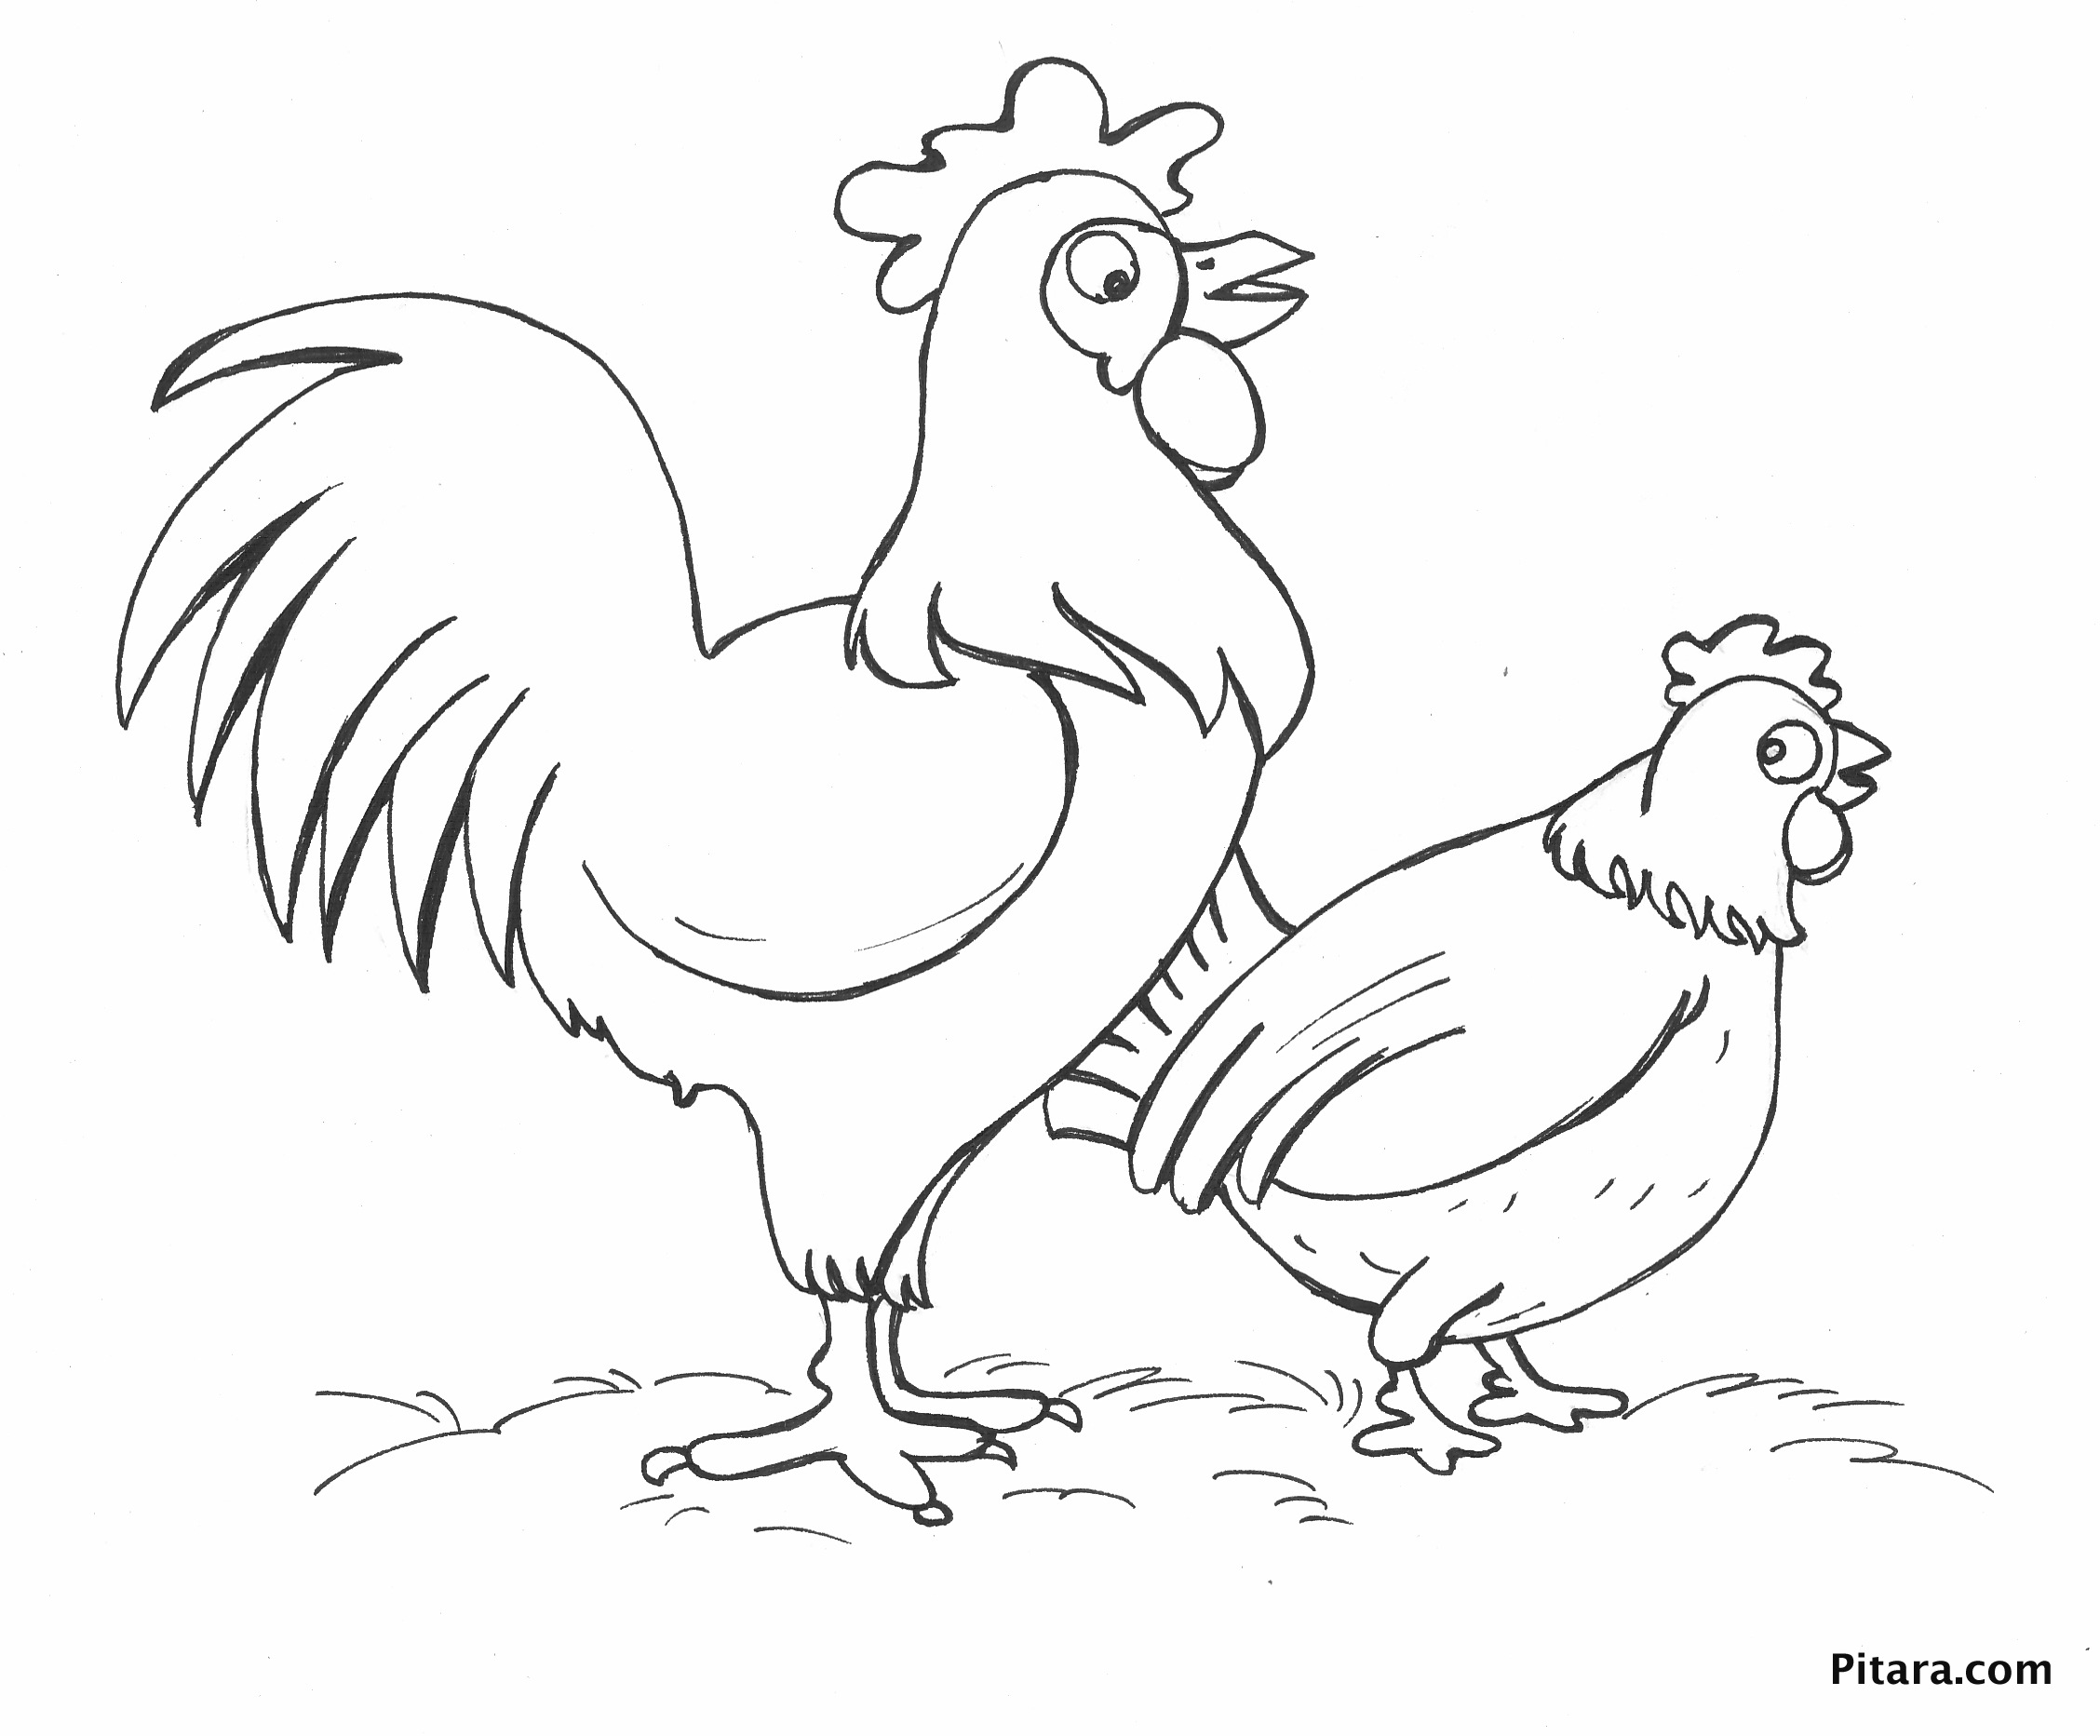 Two chickens - Coloring page - Pitara Kids Network